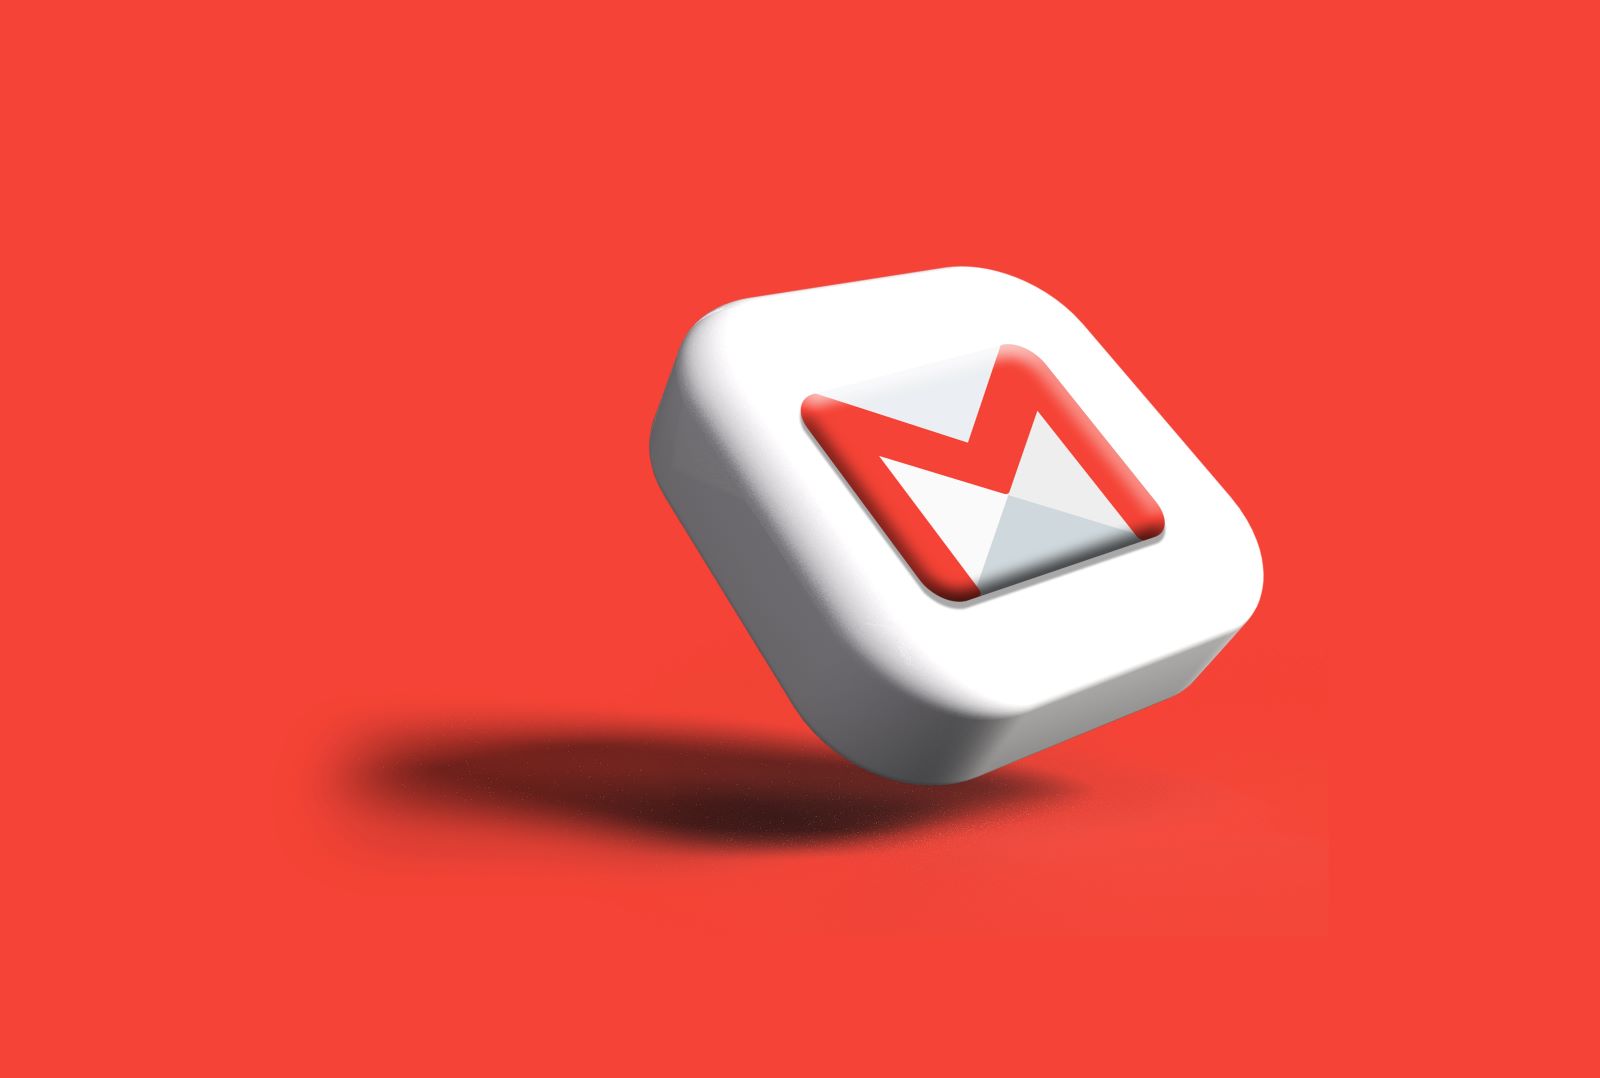 gmail icon on red background